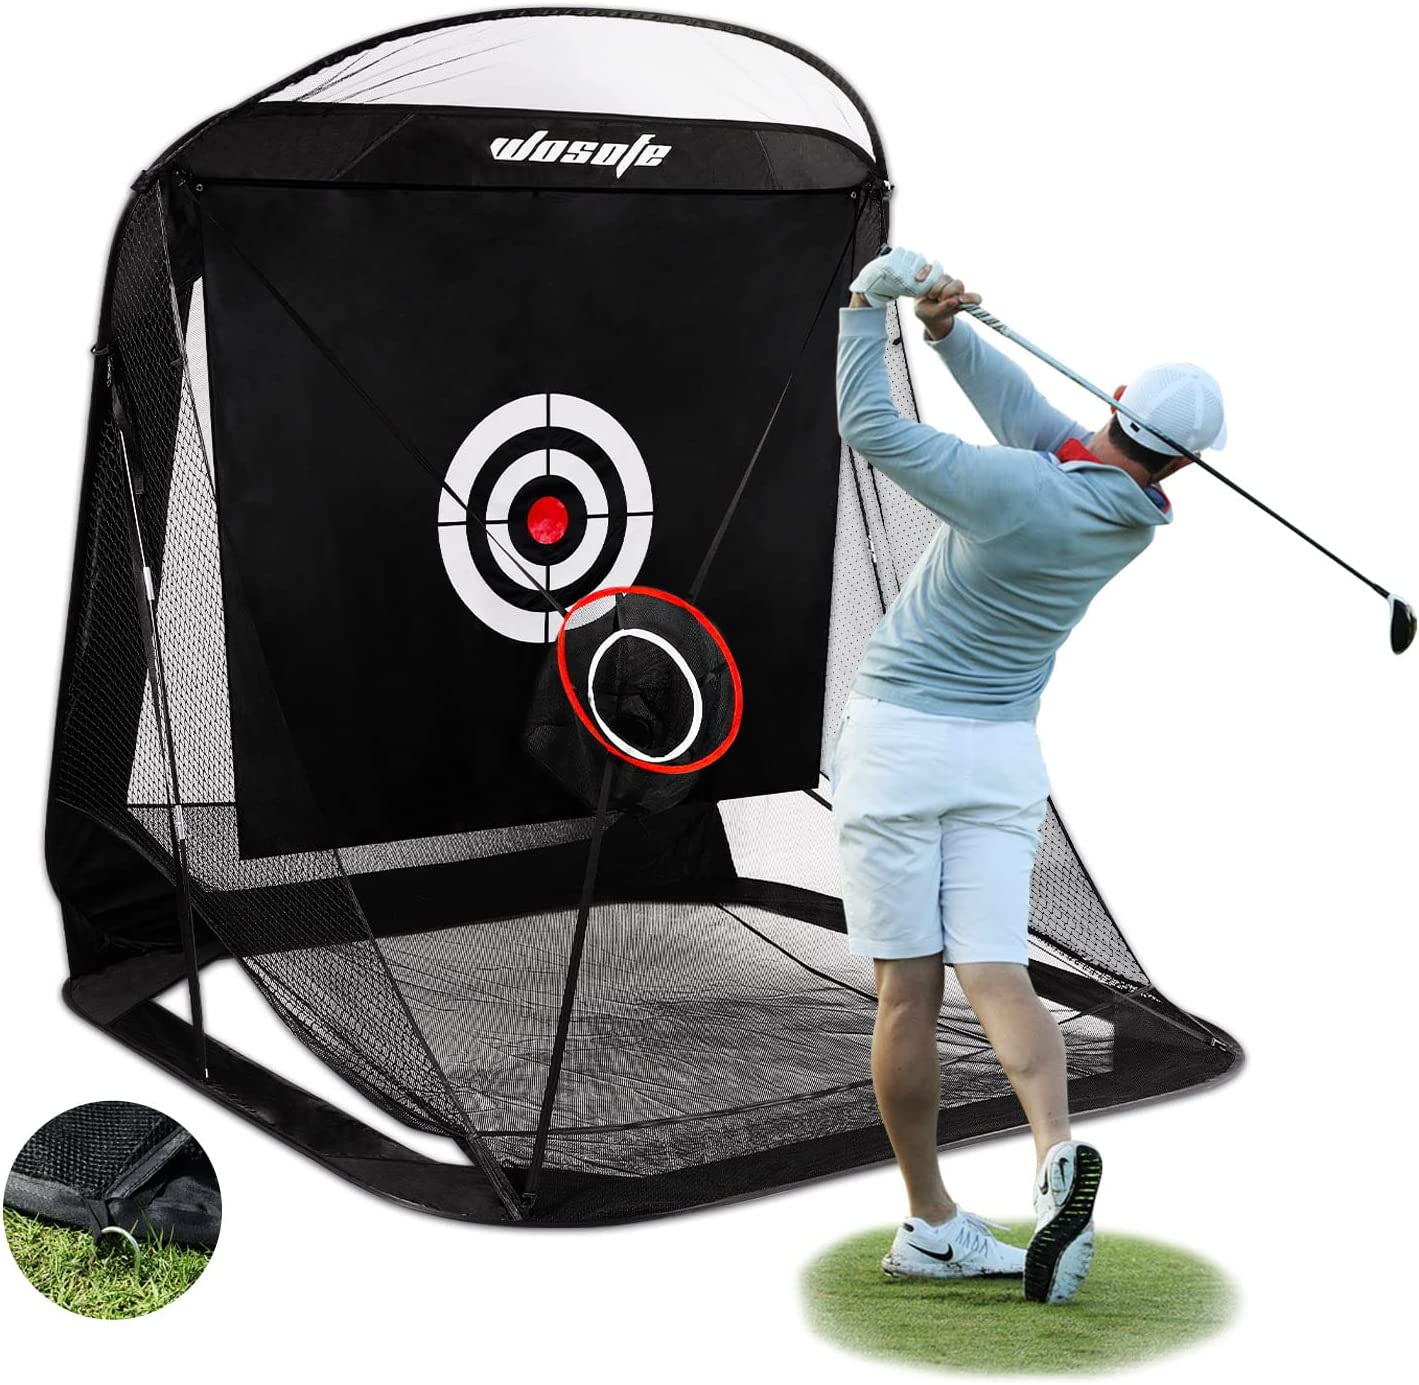 Golf Practice Nets  Improve Your Swing With TheNetReturn Golf Net